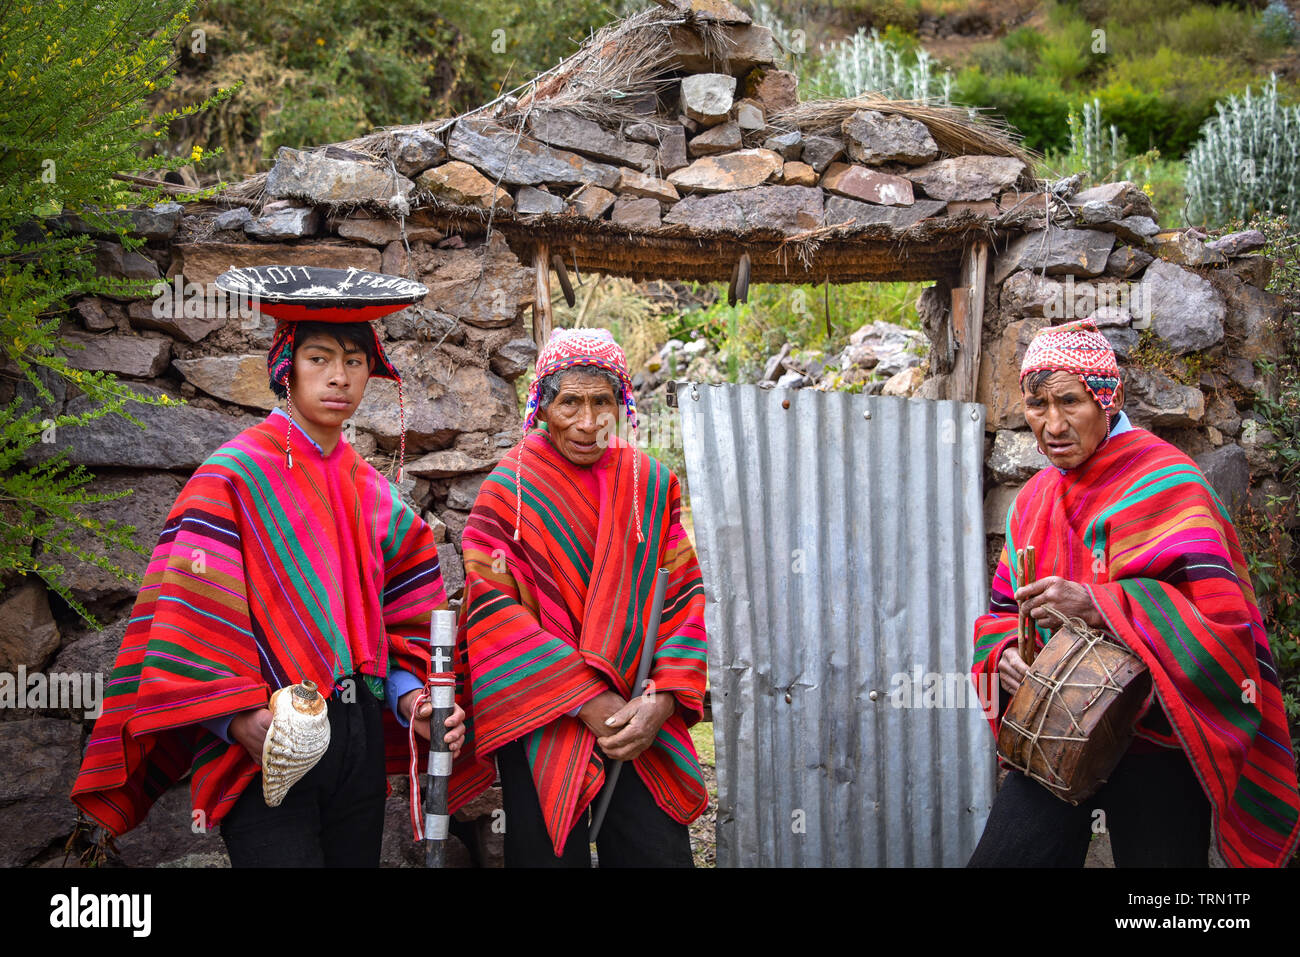 Sacred Valley, Cusco, Peru - Oct 13, 2018: A group of musicians in a rural Quechua community near  the Sacred Valley Stock Photo